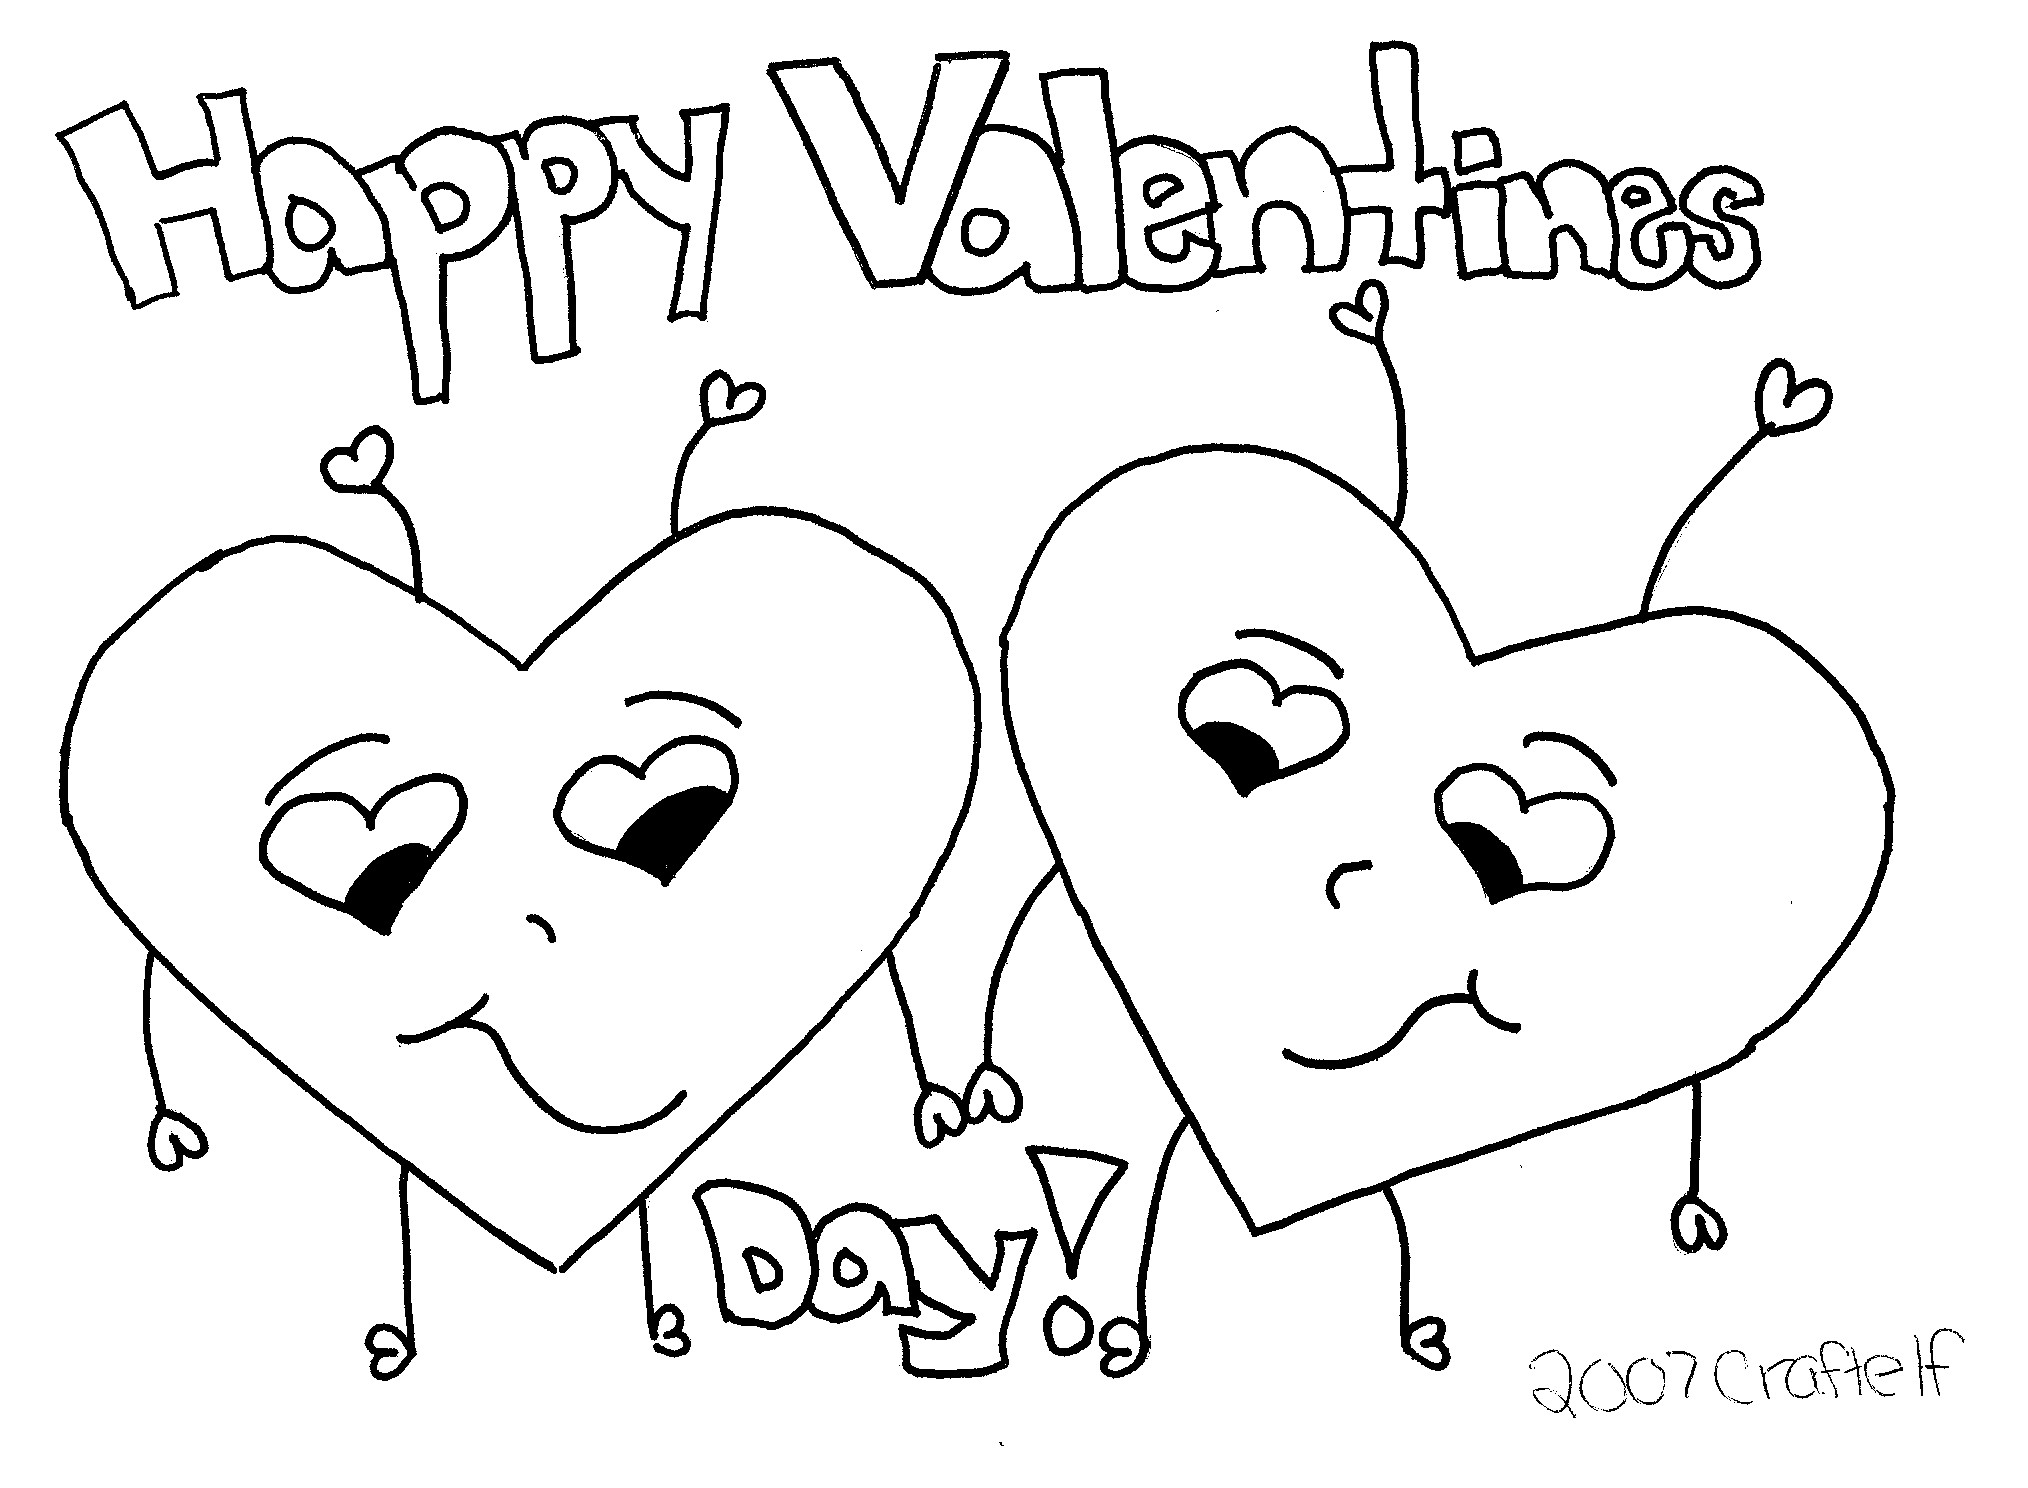 valentine-s-day-2020-coloring-pages-coloring-home